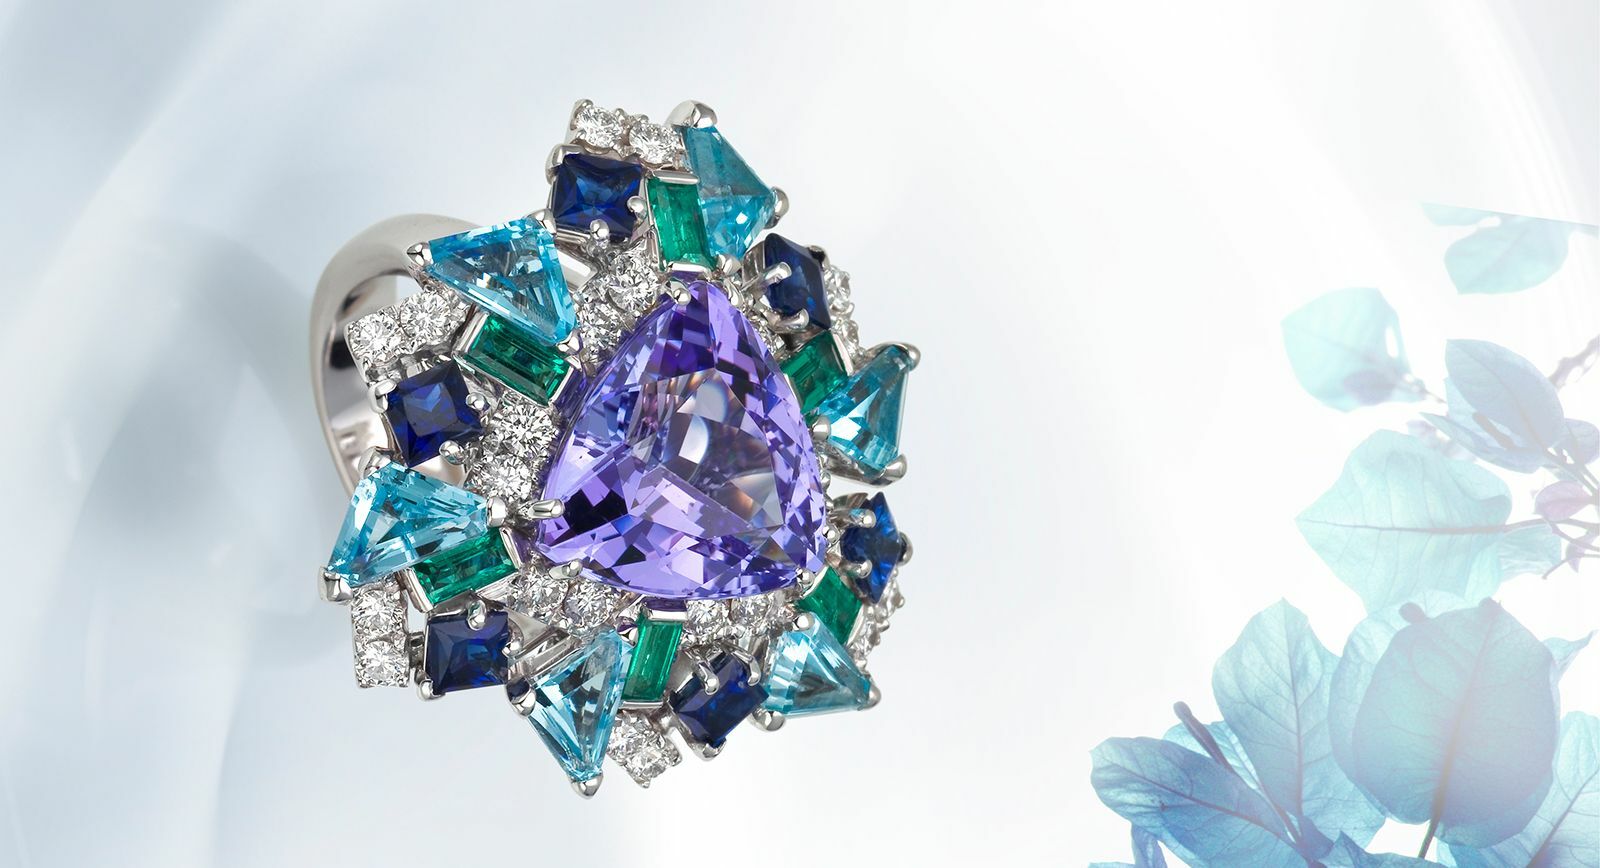 Jewellery From Carlo Barberis Allows to See the World in Bright Colours